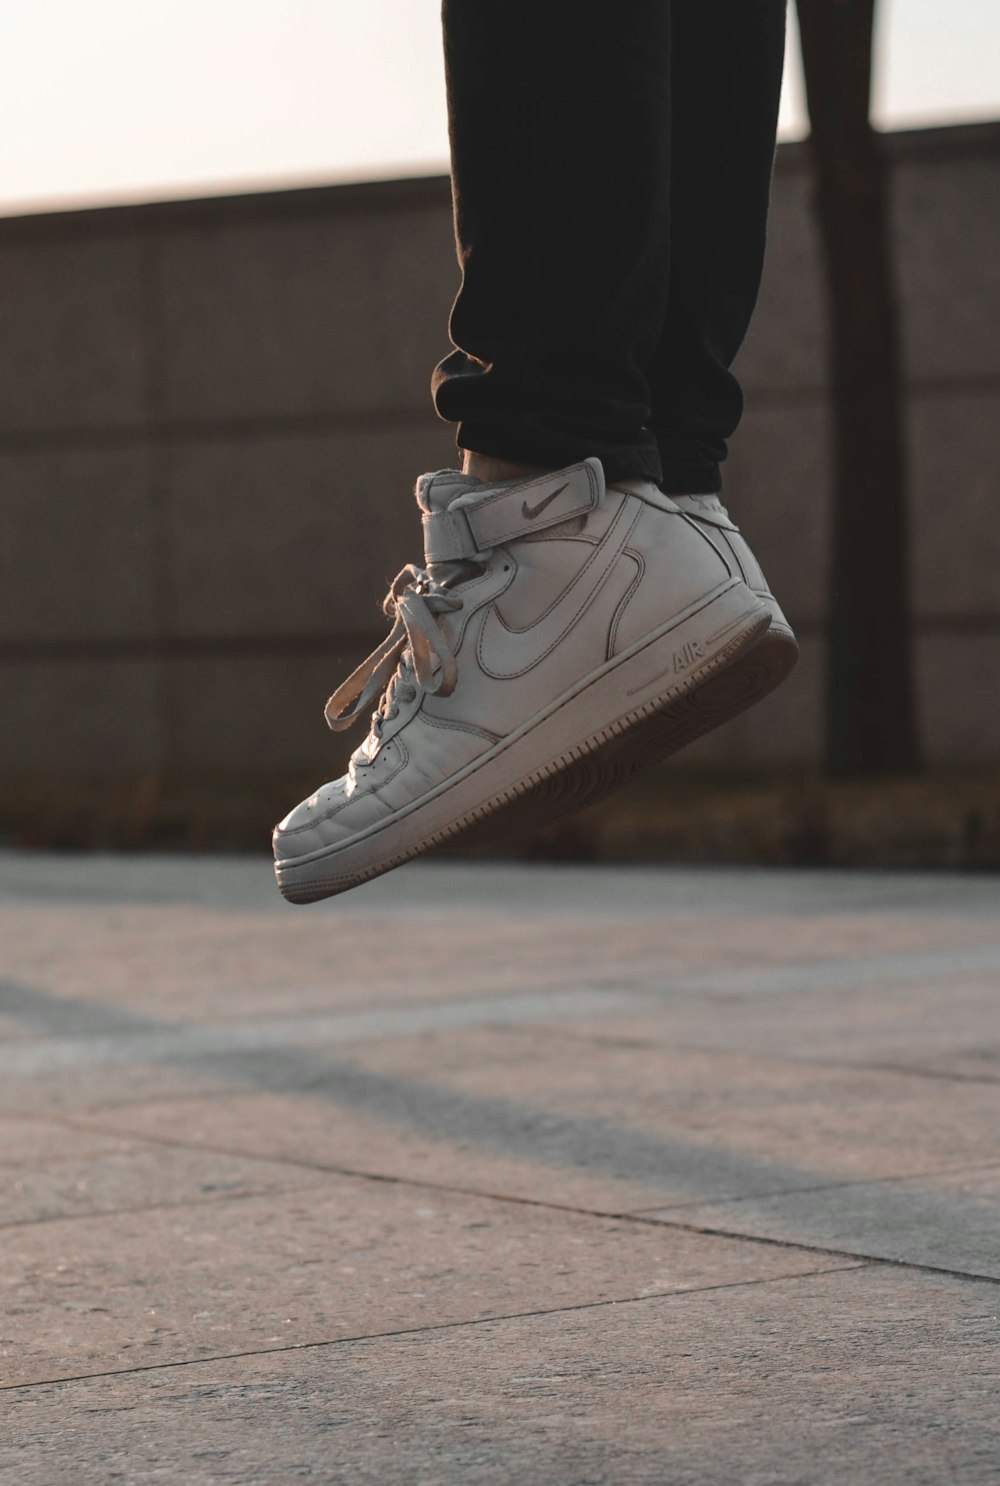 person wearing white Nike high-top shoes photo – Free Grey Image on Unsplash